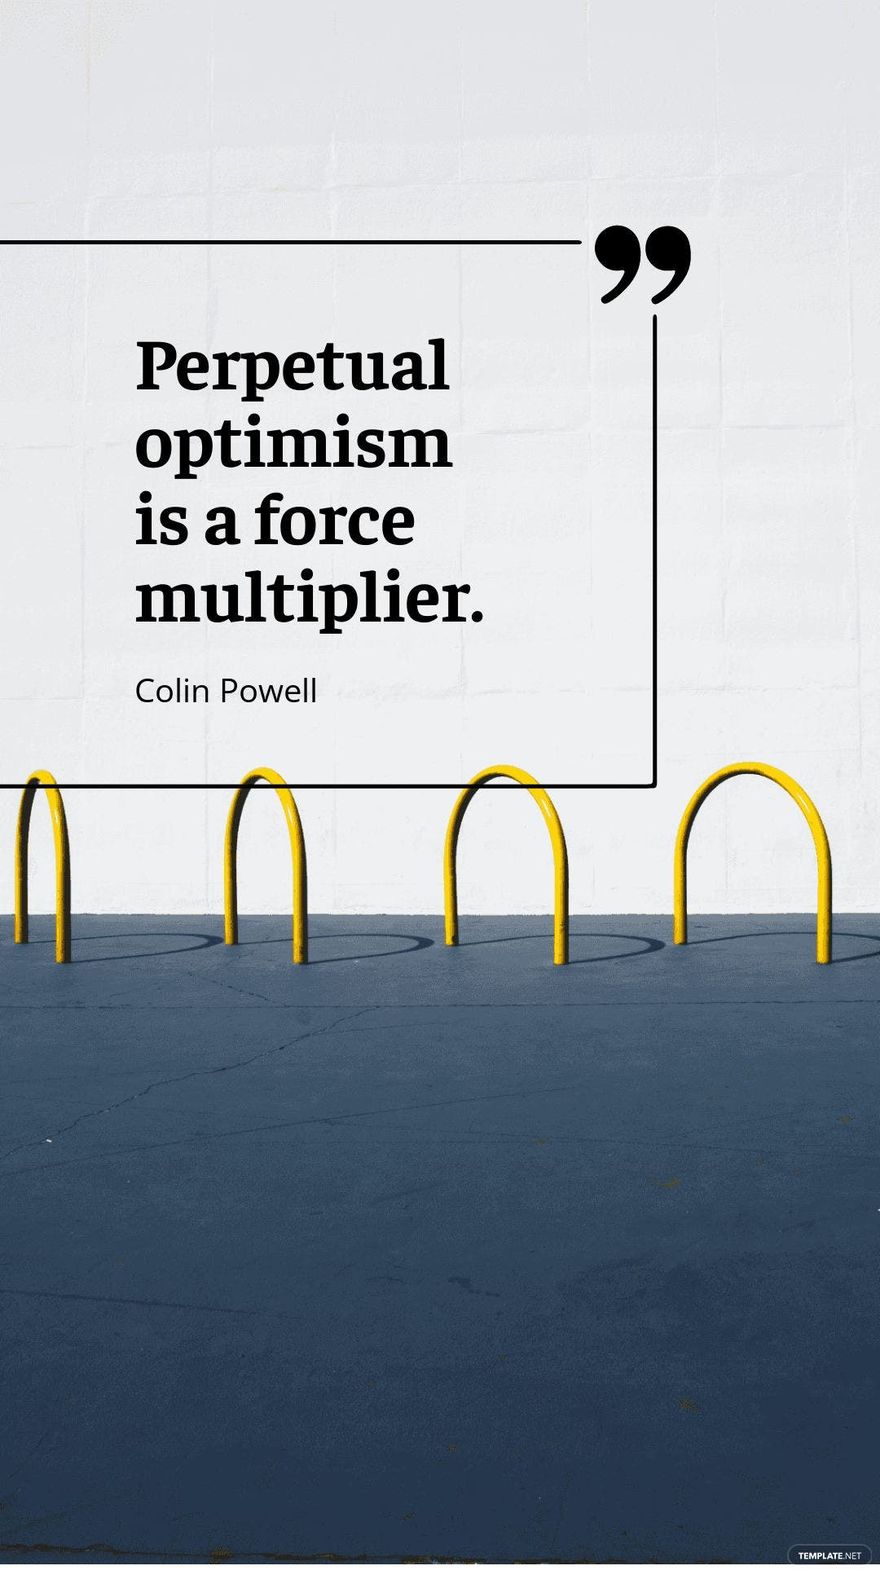 Colin Powell - Perpetual optimism is a force multiplier.